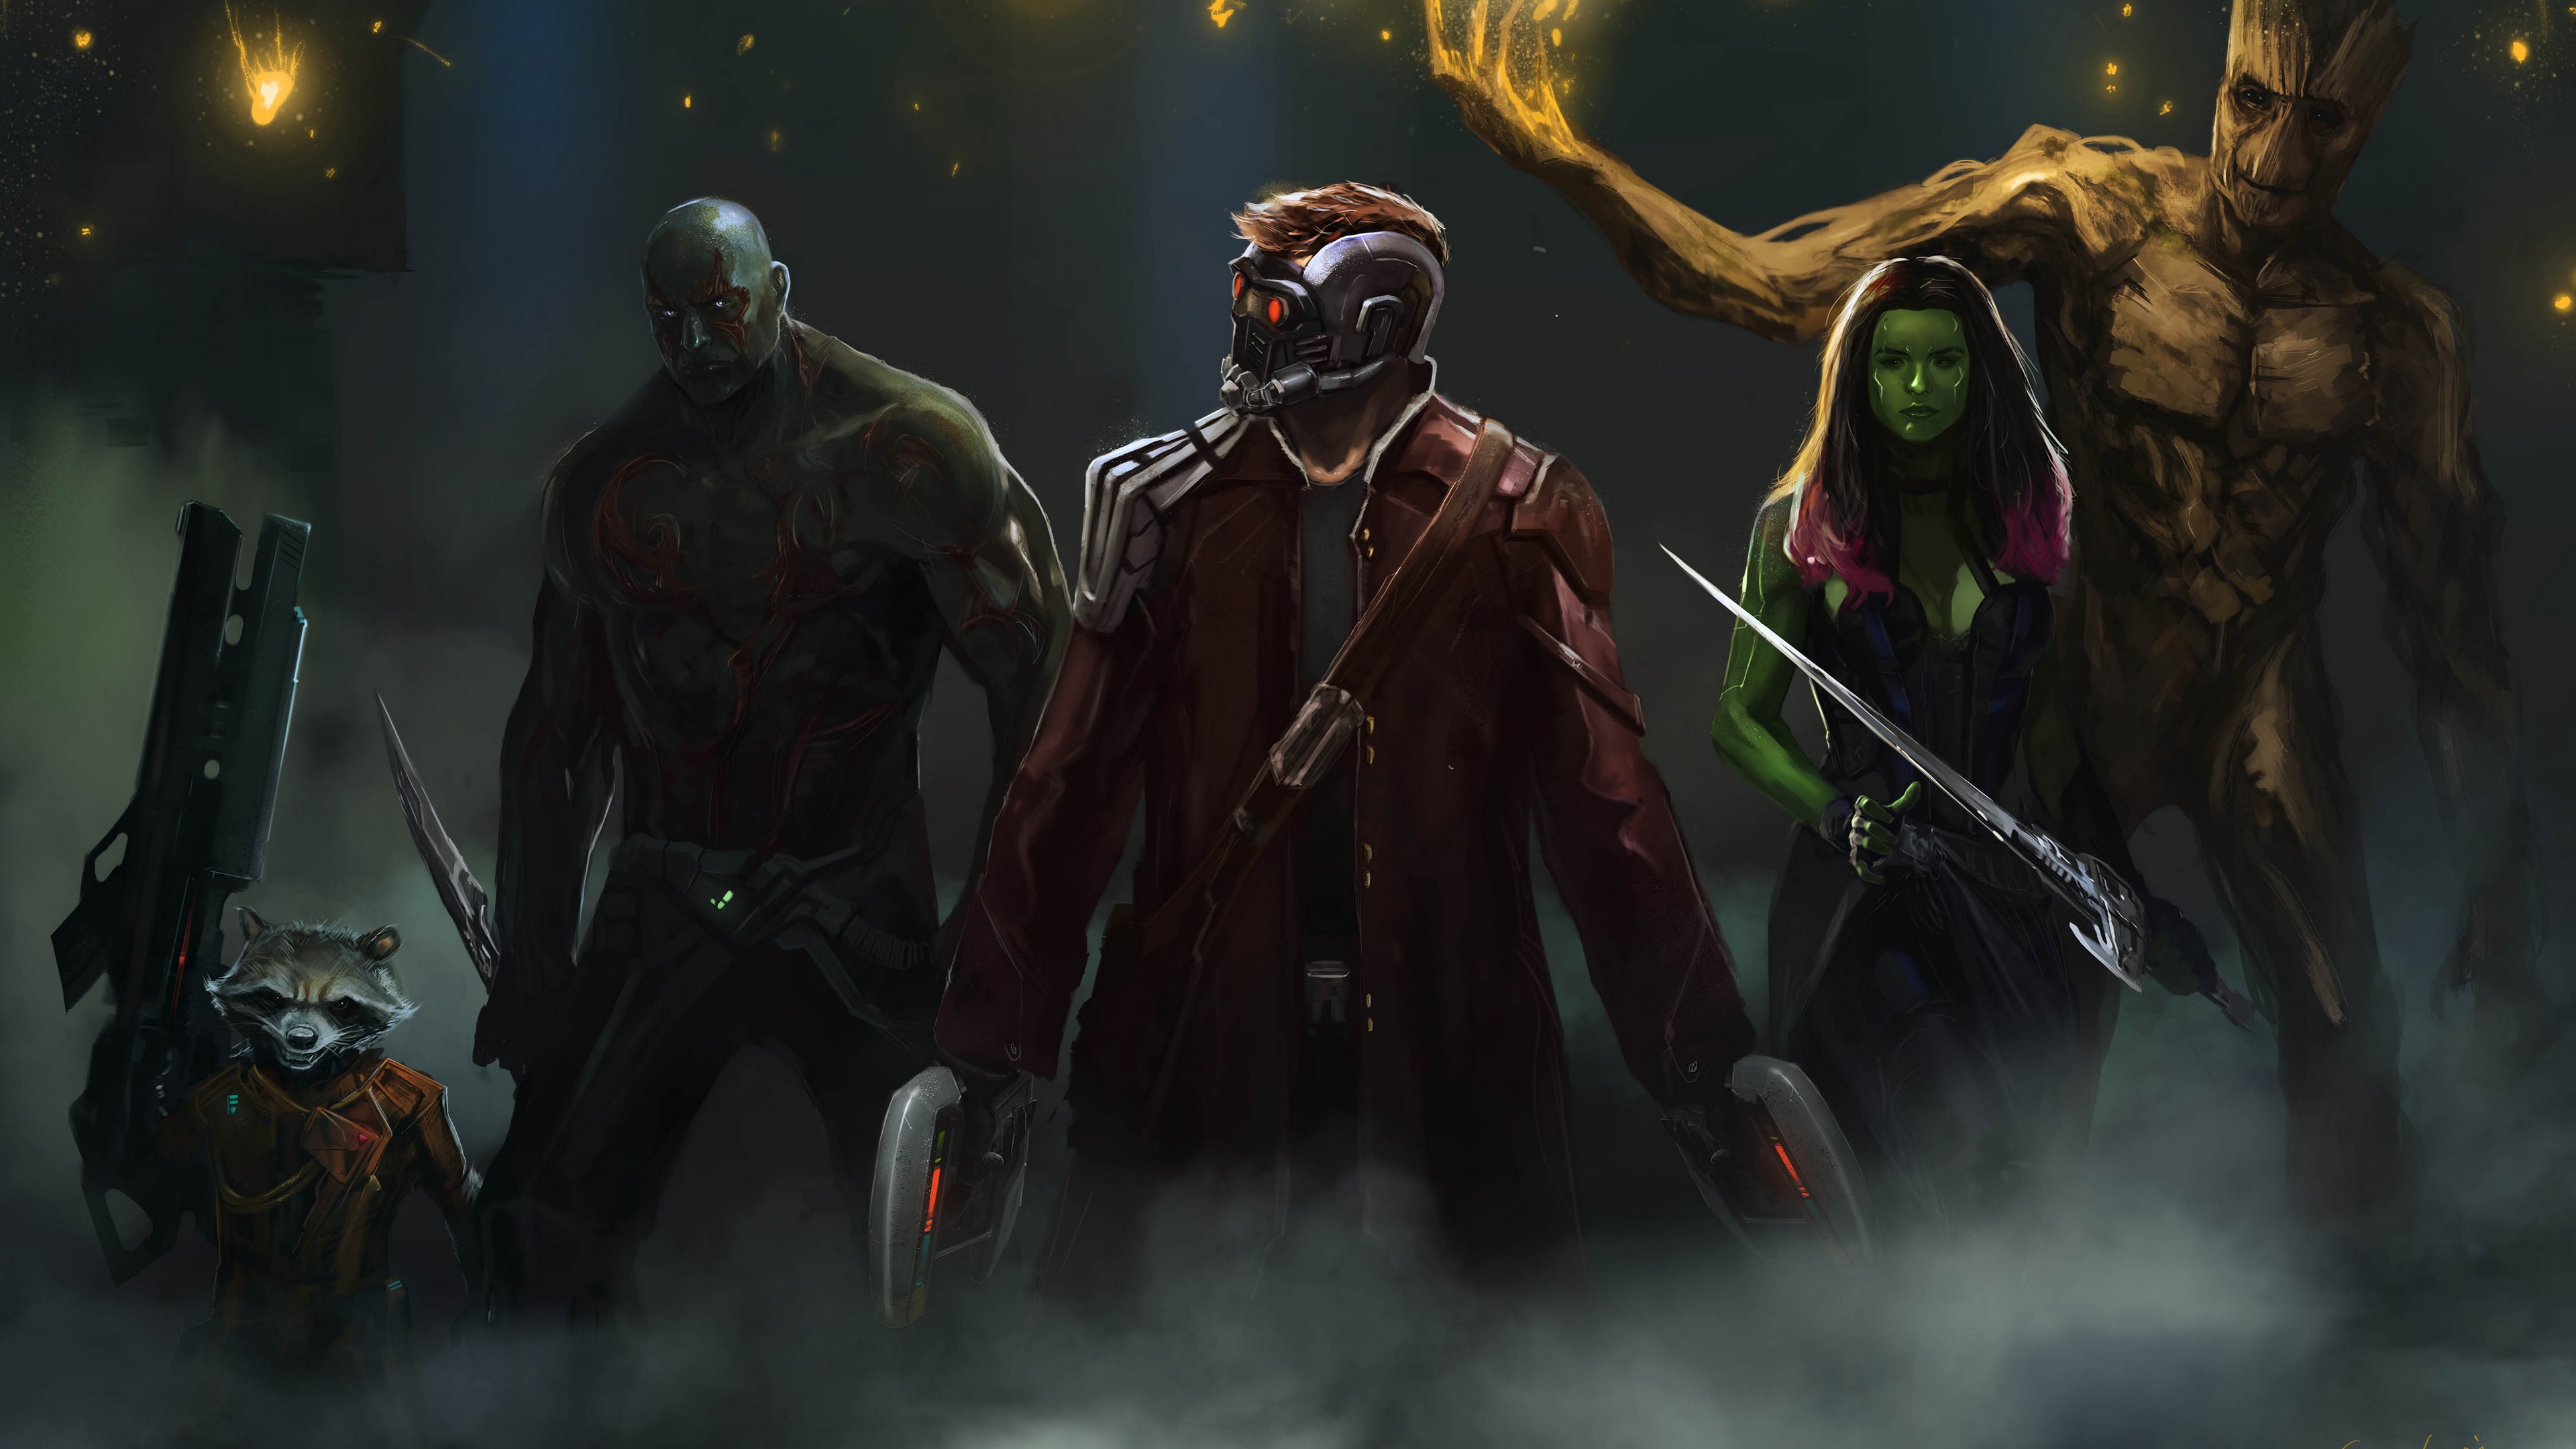 Wallpaper / guardians of the galaxy vol guardians of the galaxy, 4k, hd, star lord, groot, rocket raccoon, gamora, drax the destroyer, artist, artwork, free download